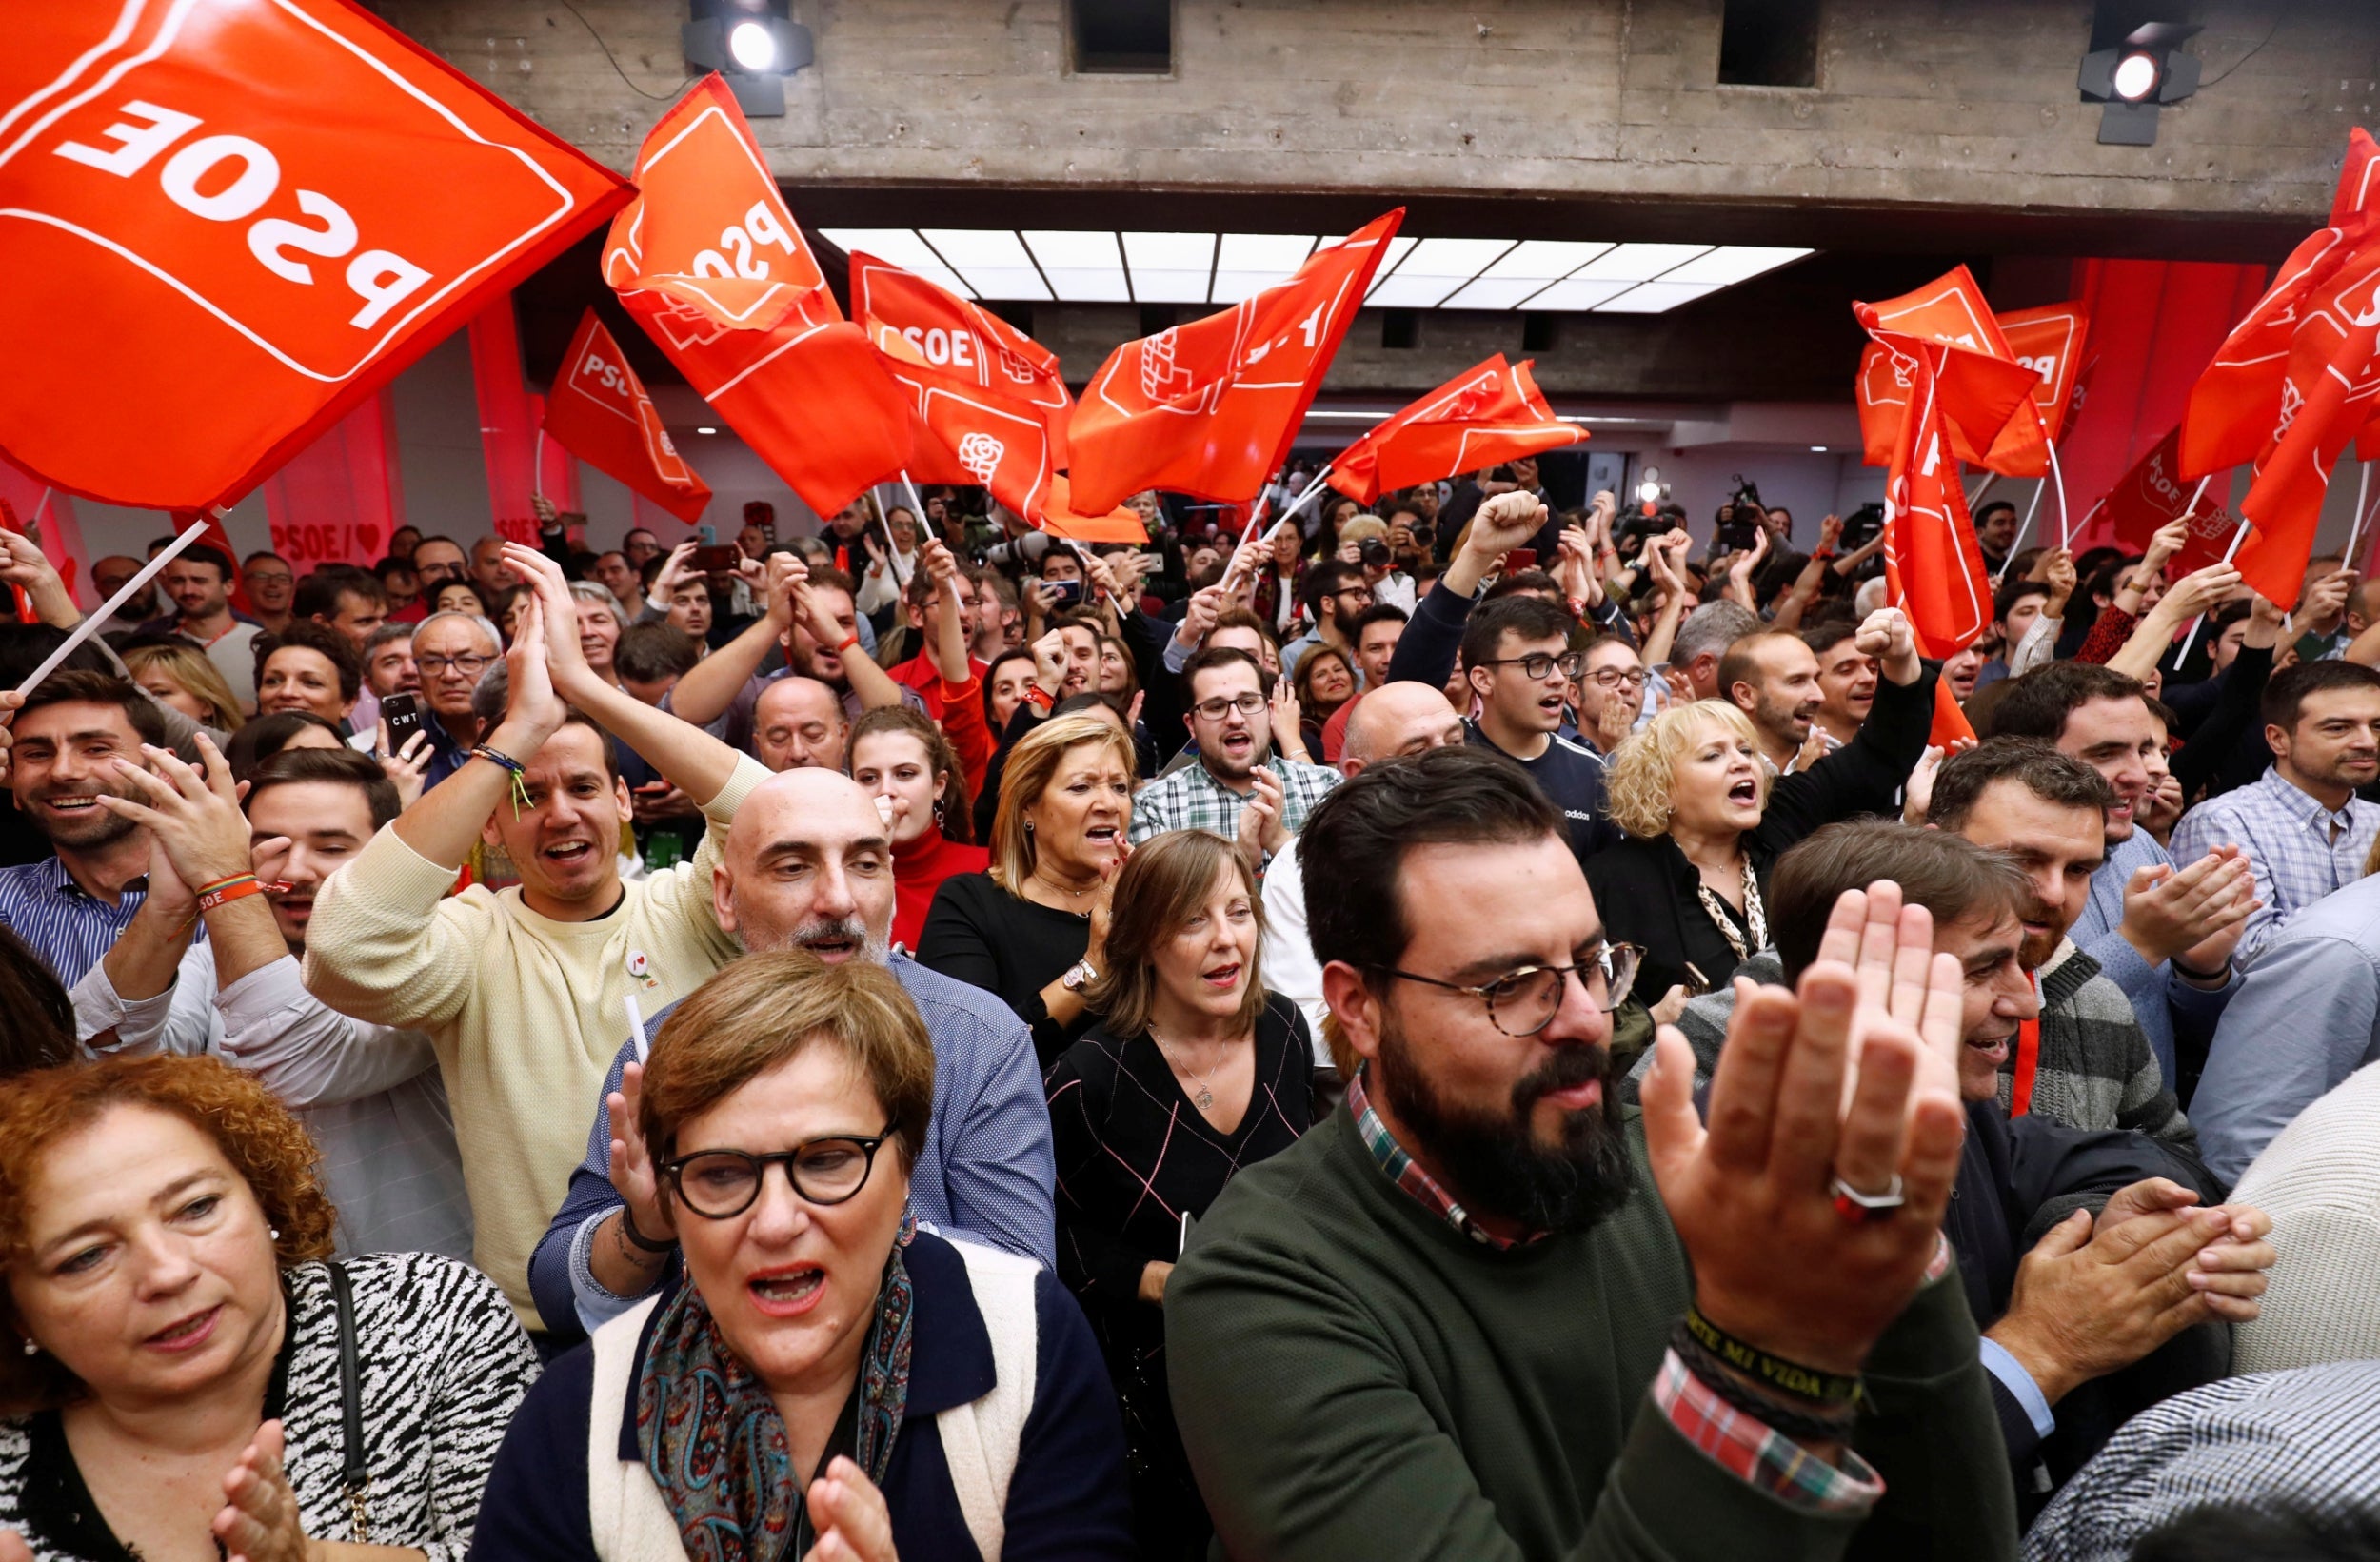 Supporters of Spain's acting prime minister and Socialist Party leader (PSOE) candidate Pedro Sanchez react to the results at party headquarters in Madrid